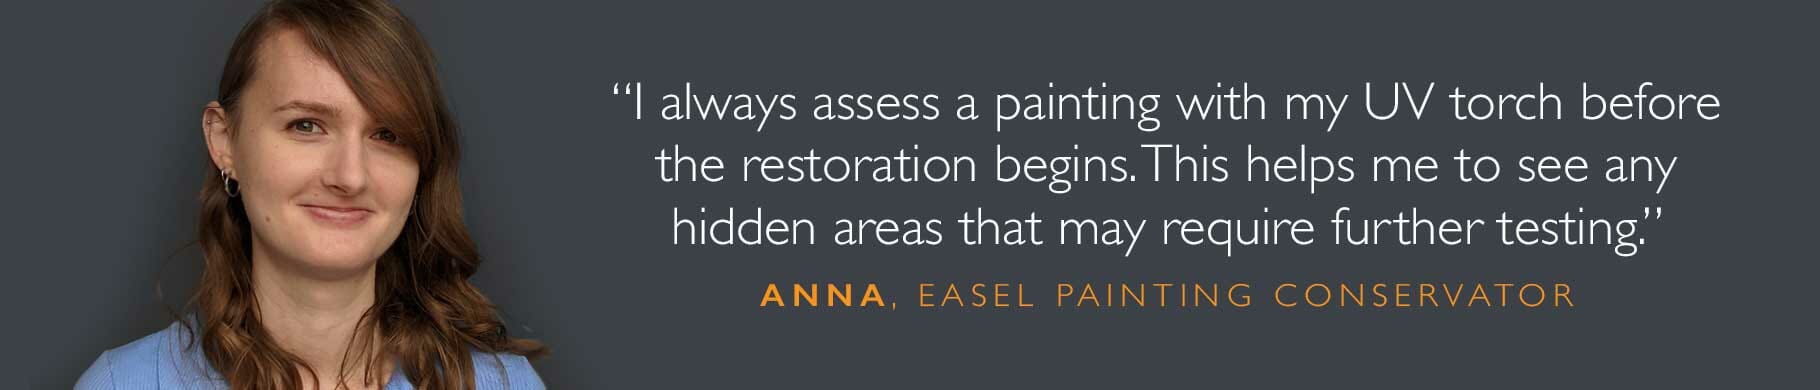 Anna quote about using UV torch before restoration